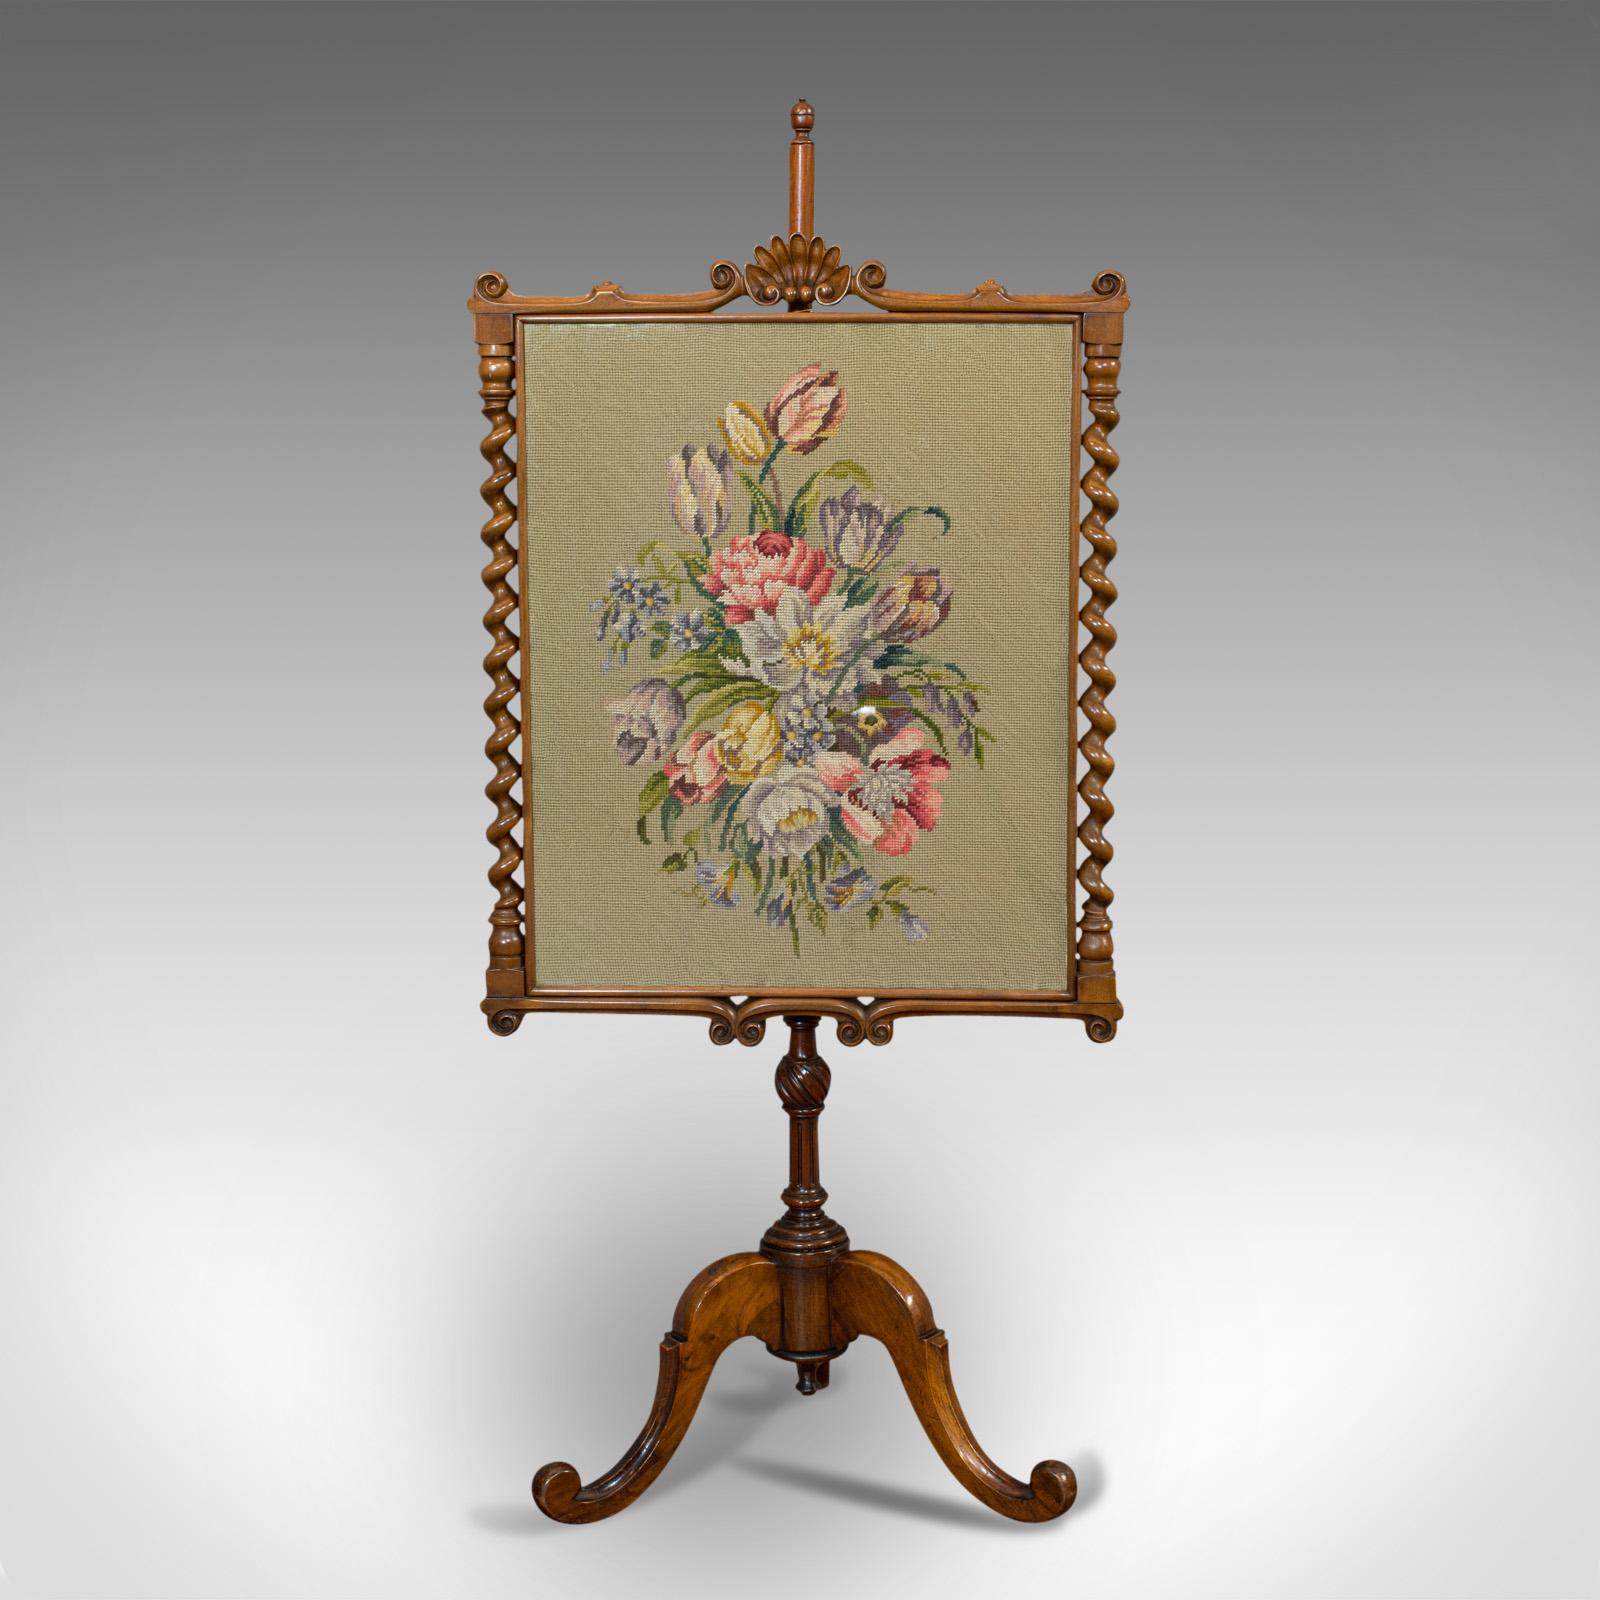 This is an antique adjustable fire screen. An English, walnut and needlepoint decorative pole screen, dating to the Regency period, circa 1820.

A screen with beautiful carved craftsmanship
Displaying a desirable aged patina
Rich walnut stocks